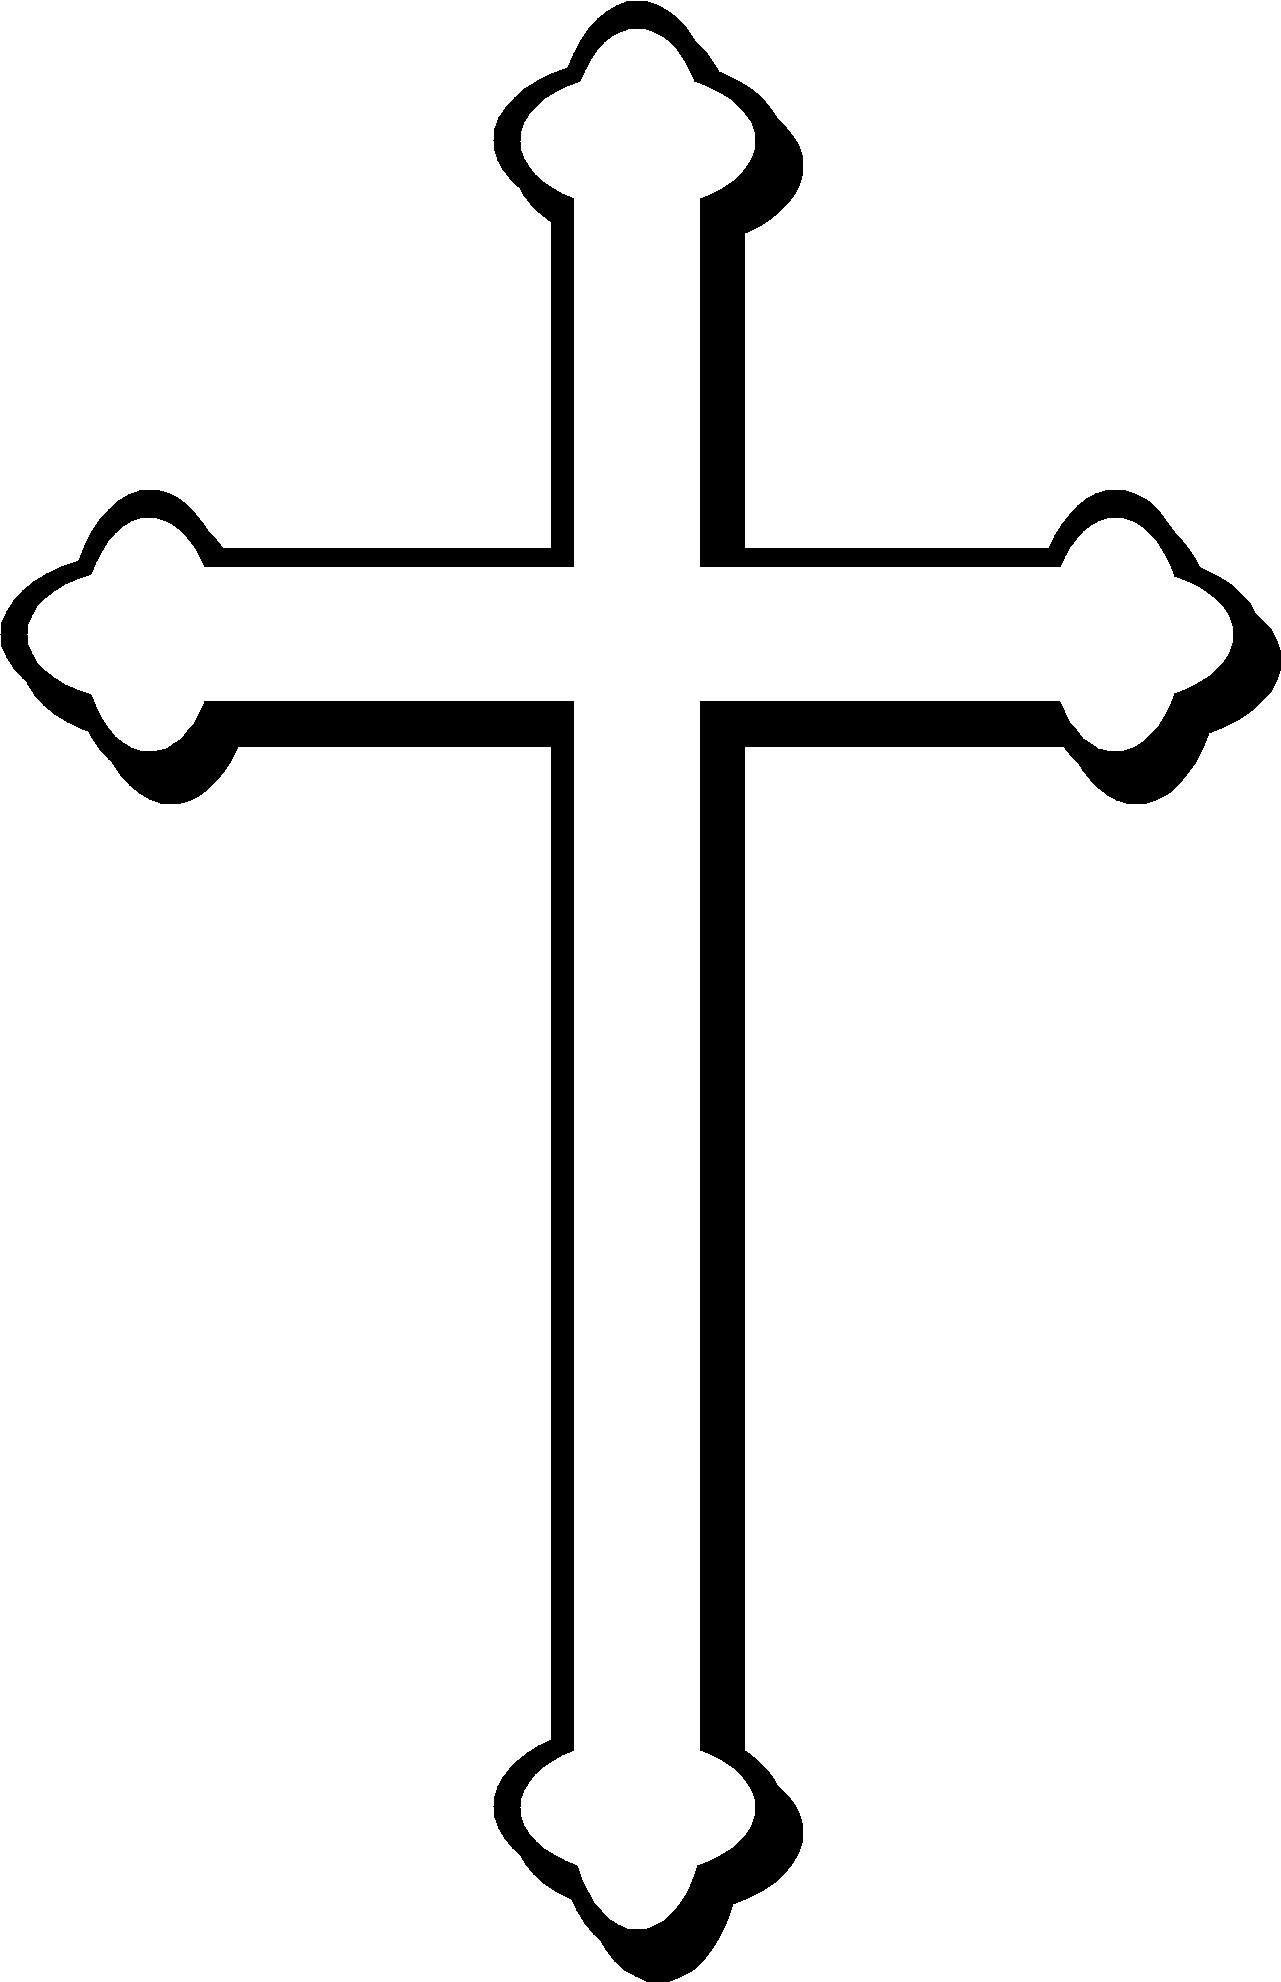 Images Of Christian Symbols | Free Download Clip Art | Free Clip ...